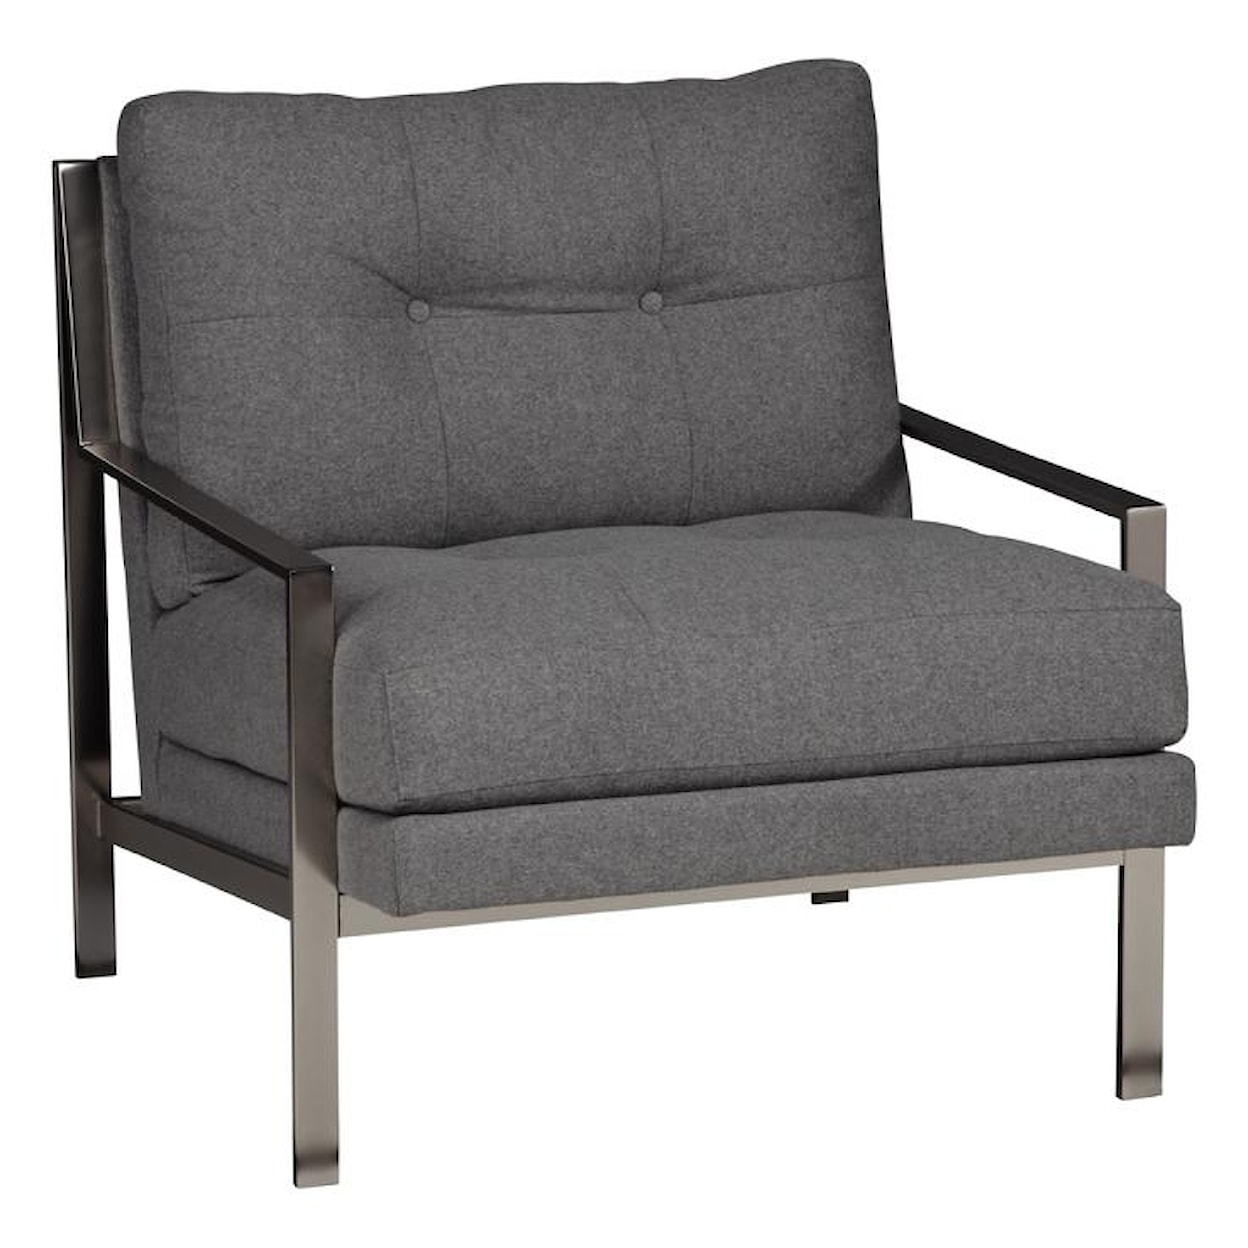 Jonathan Louis Accentuates Mansfield Metal Accent Chair